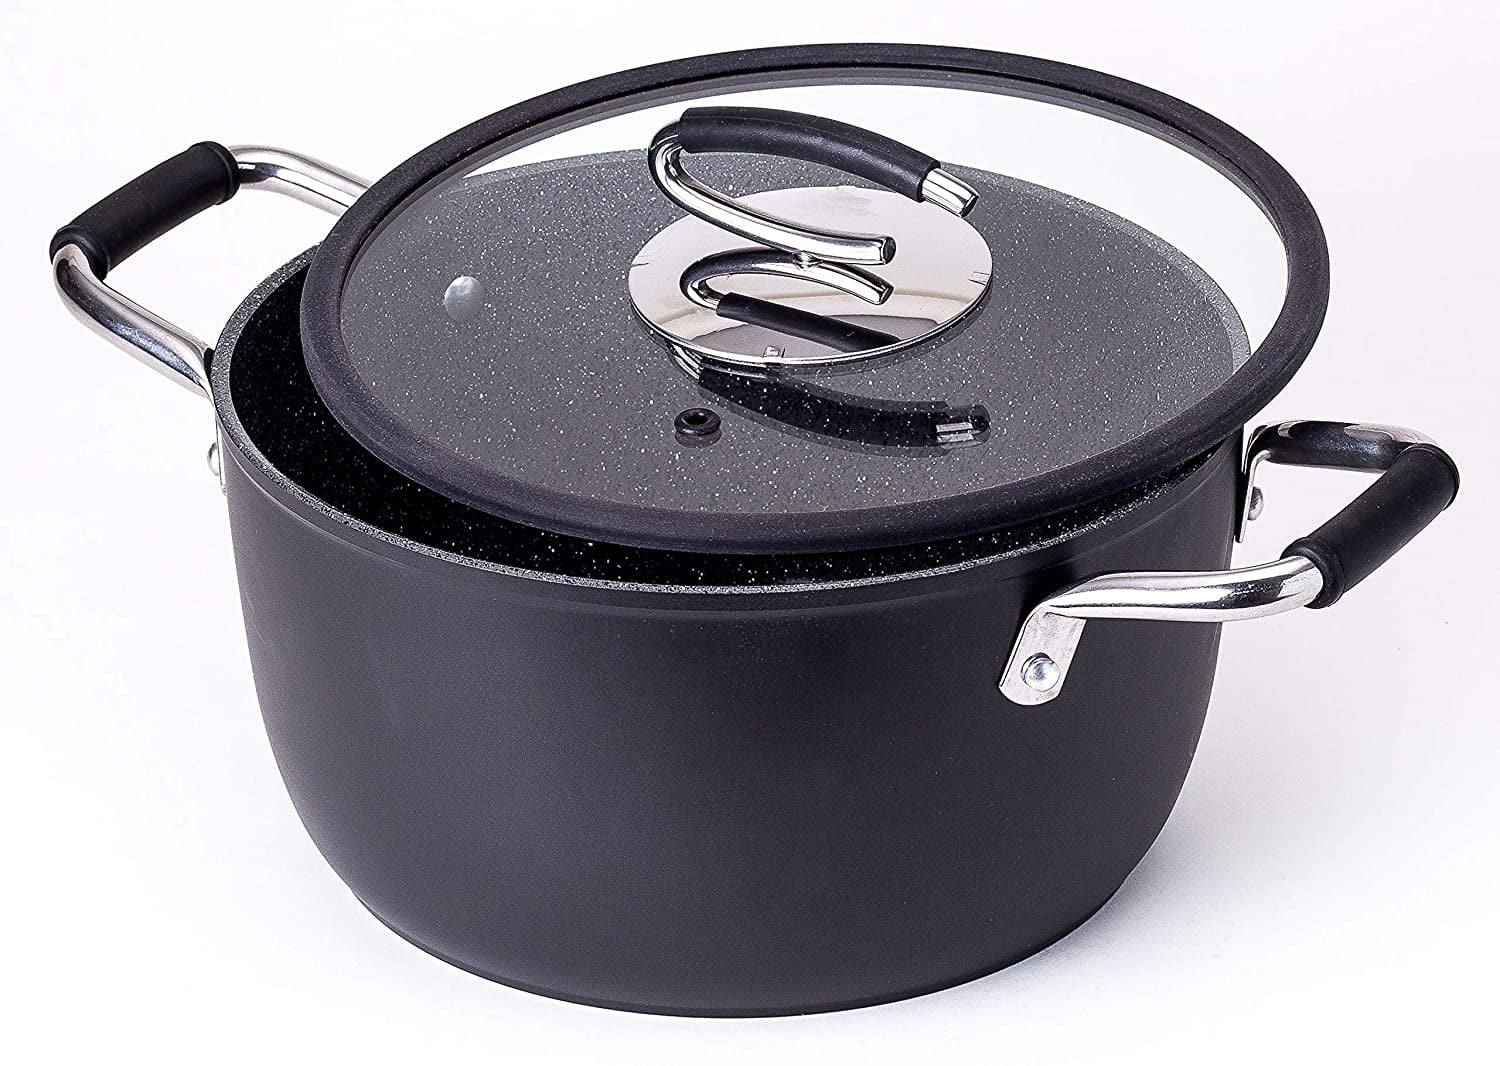 Nontoxic Ceramic Coated Stock Pot with Oven Safe Glass Lid Vesuvio 7.7 Litre Nonstick Dutch Oven Made in Italy